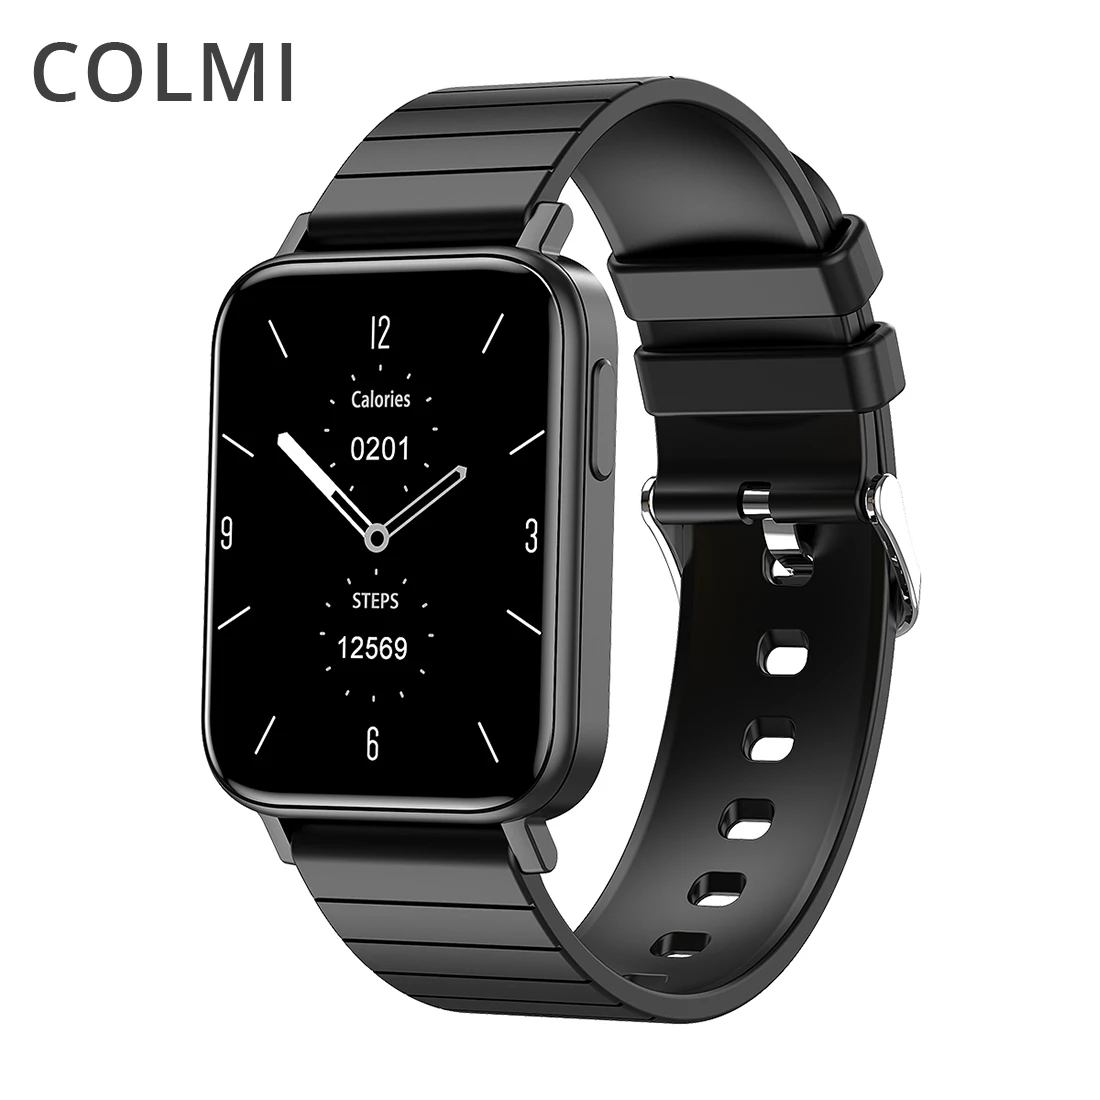 

COLMI P17 New Buy Smartwatch 1.65 Inch Touch Body Temperature Test Bt 5.0 Band Man Lady IP68 Waterproof Smart Watch